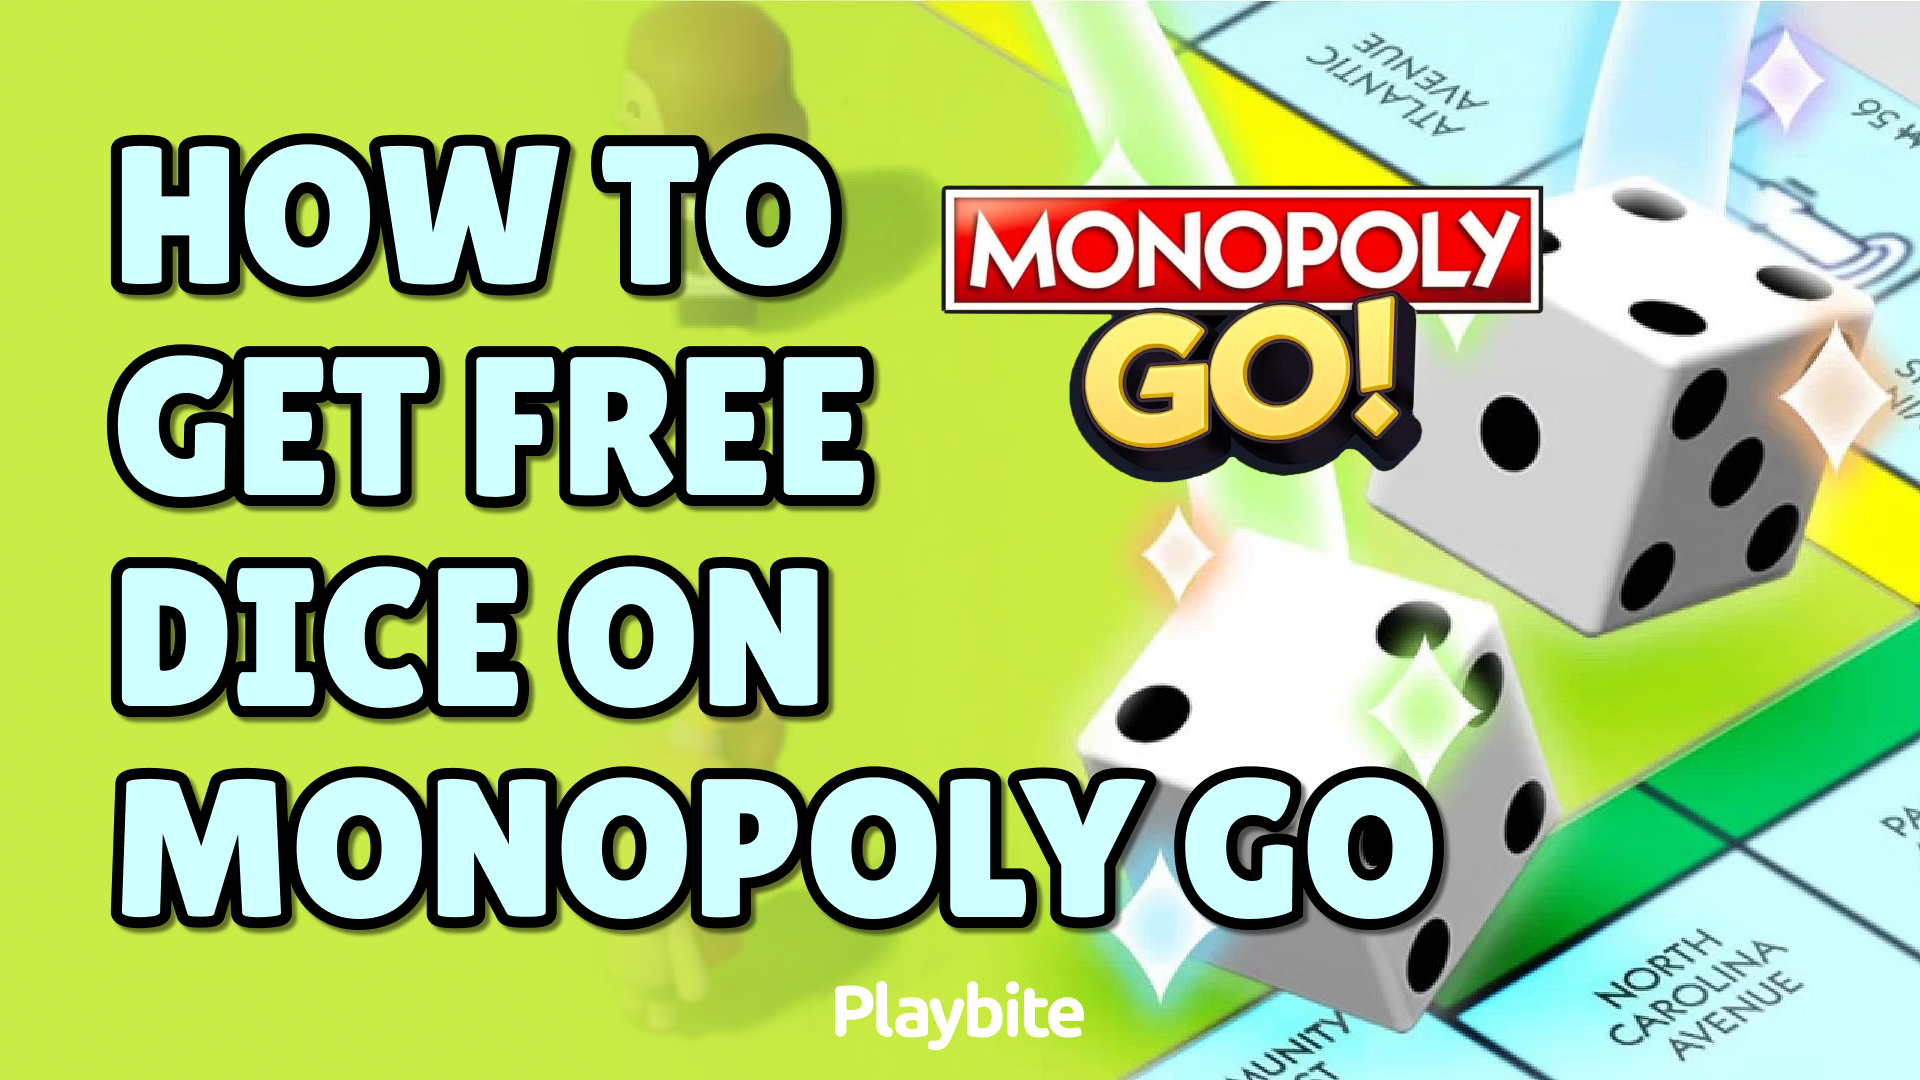 How To Get 1 Robux For Free - Playbite